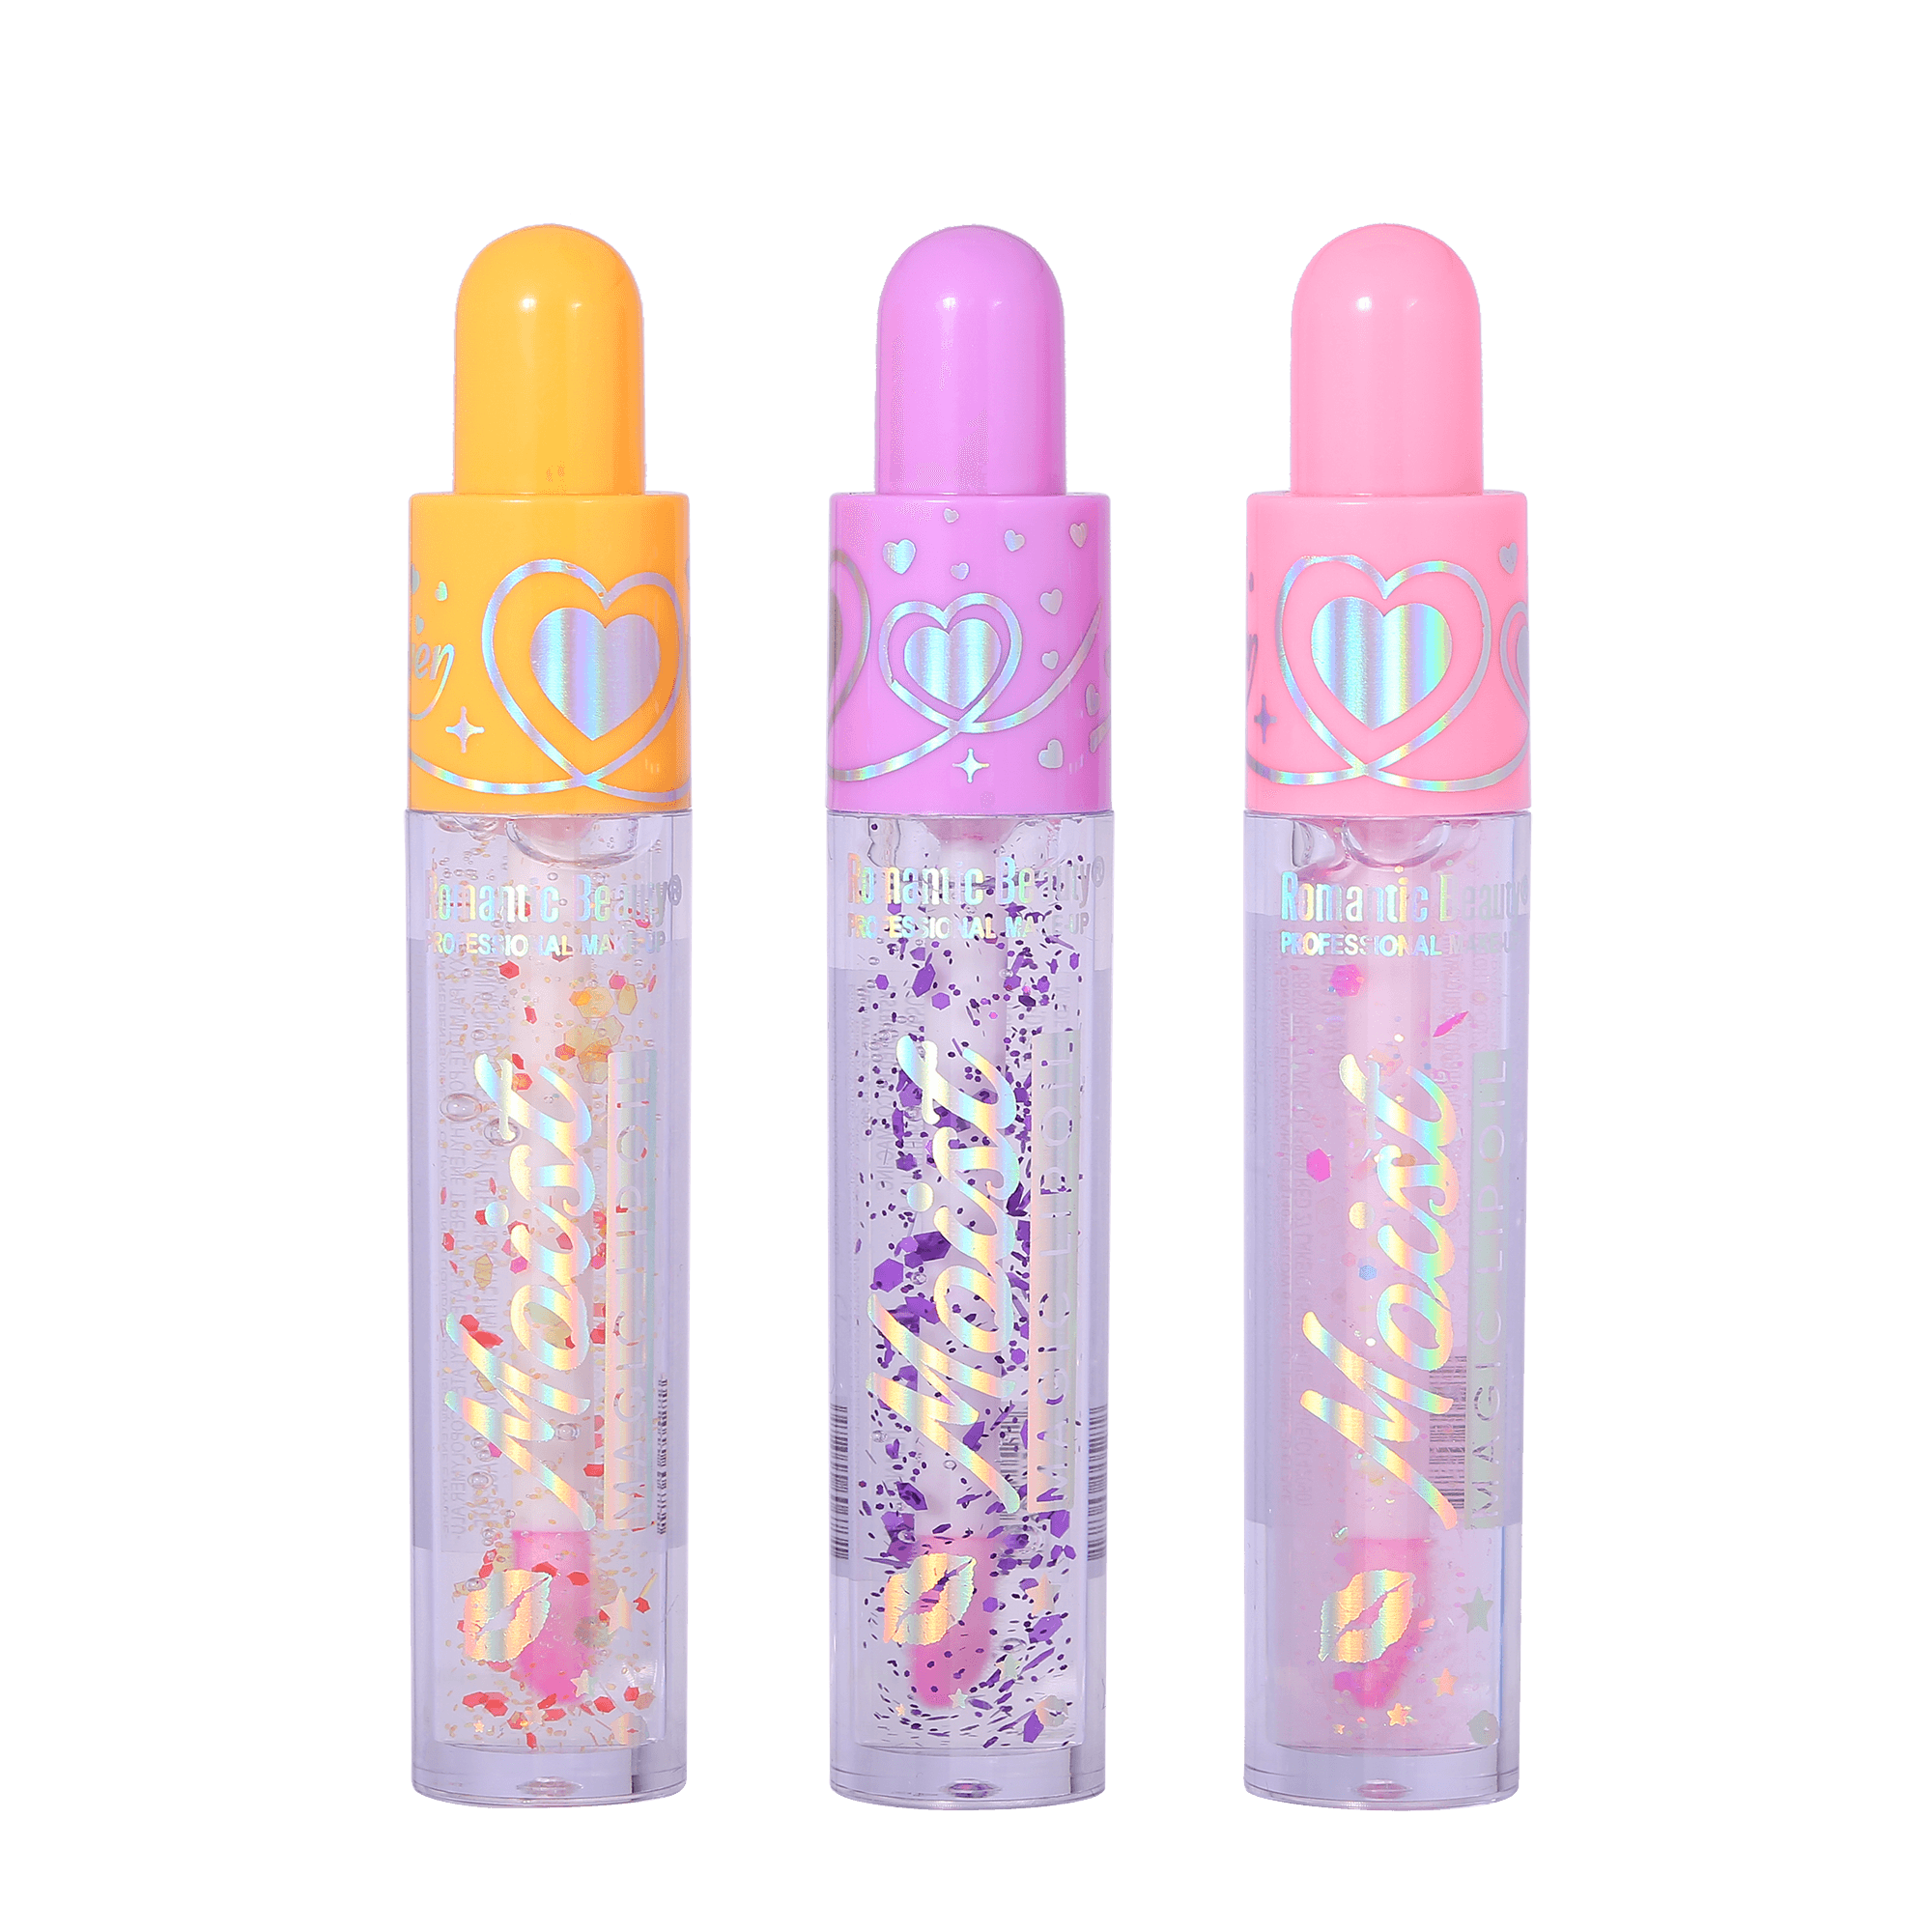 Pack 24 unidades MAGIC LIP OIL FOREVER